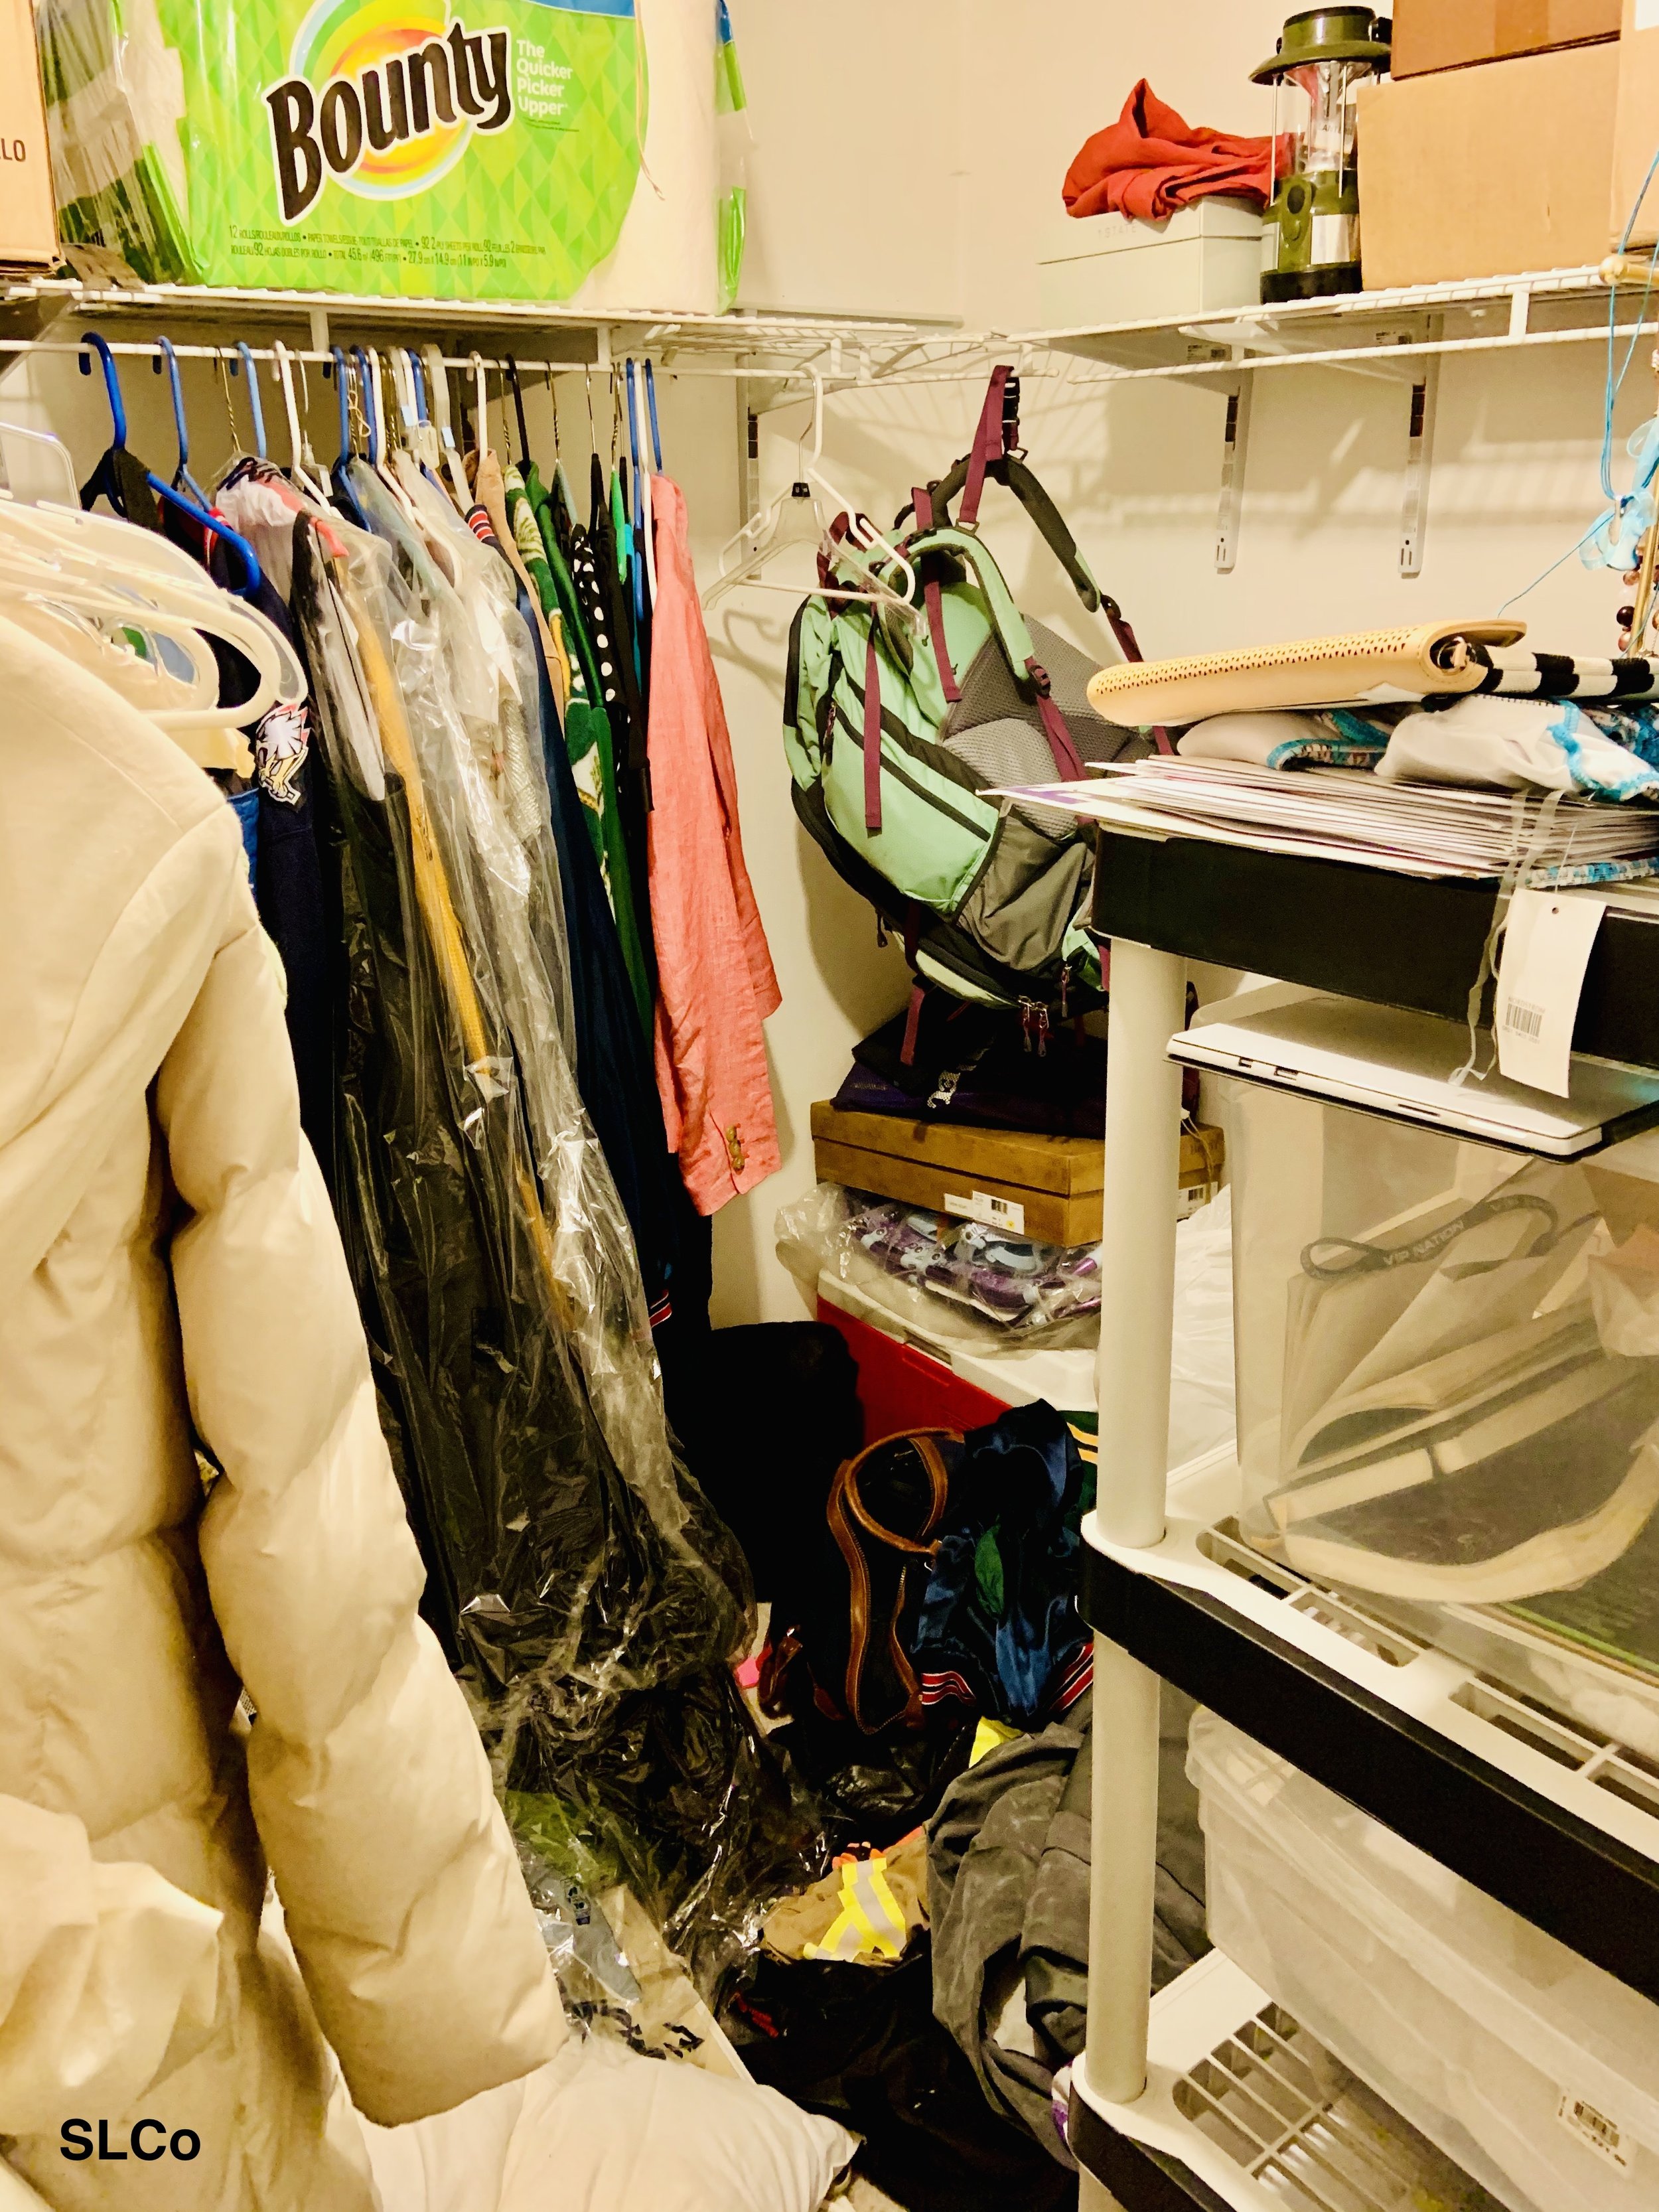 Before image of closet filled with white shelved, clothes and backpacks thrown around.